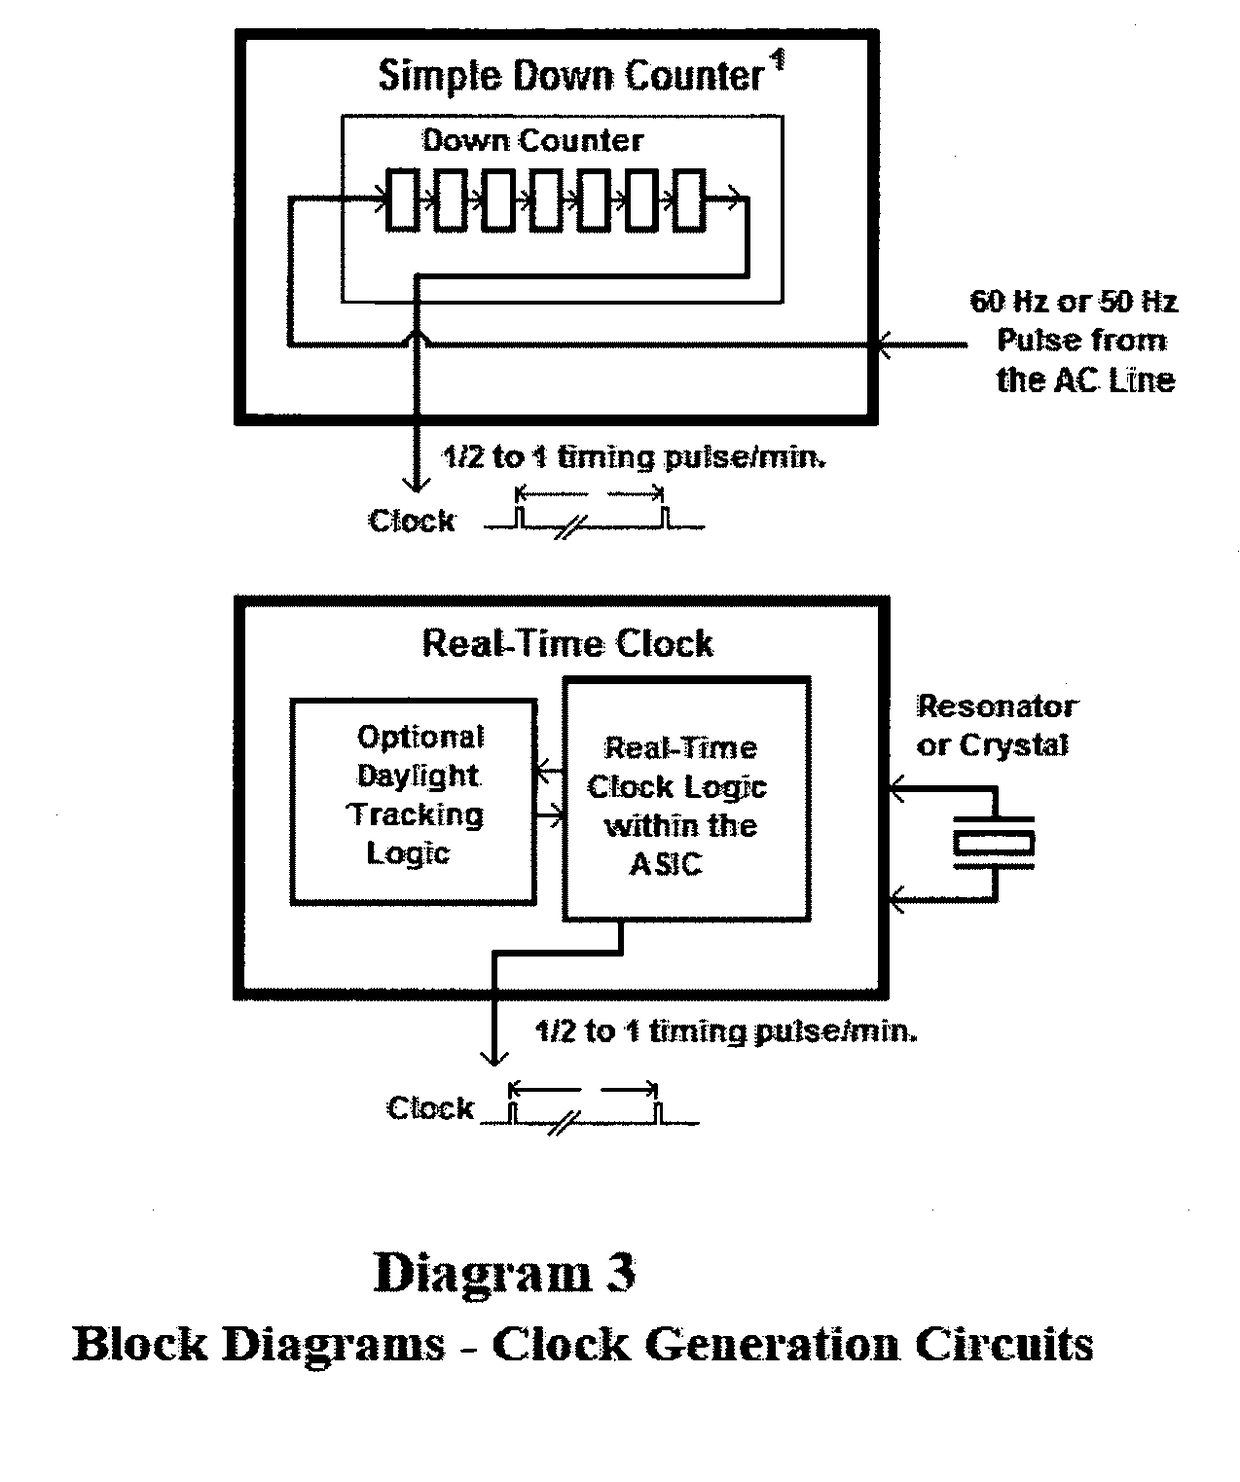 24 Hour Programmable Timer Custom Integrated Circuits